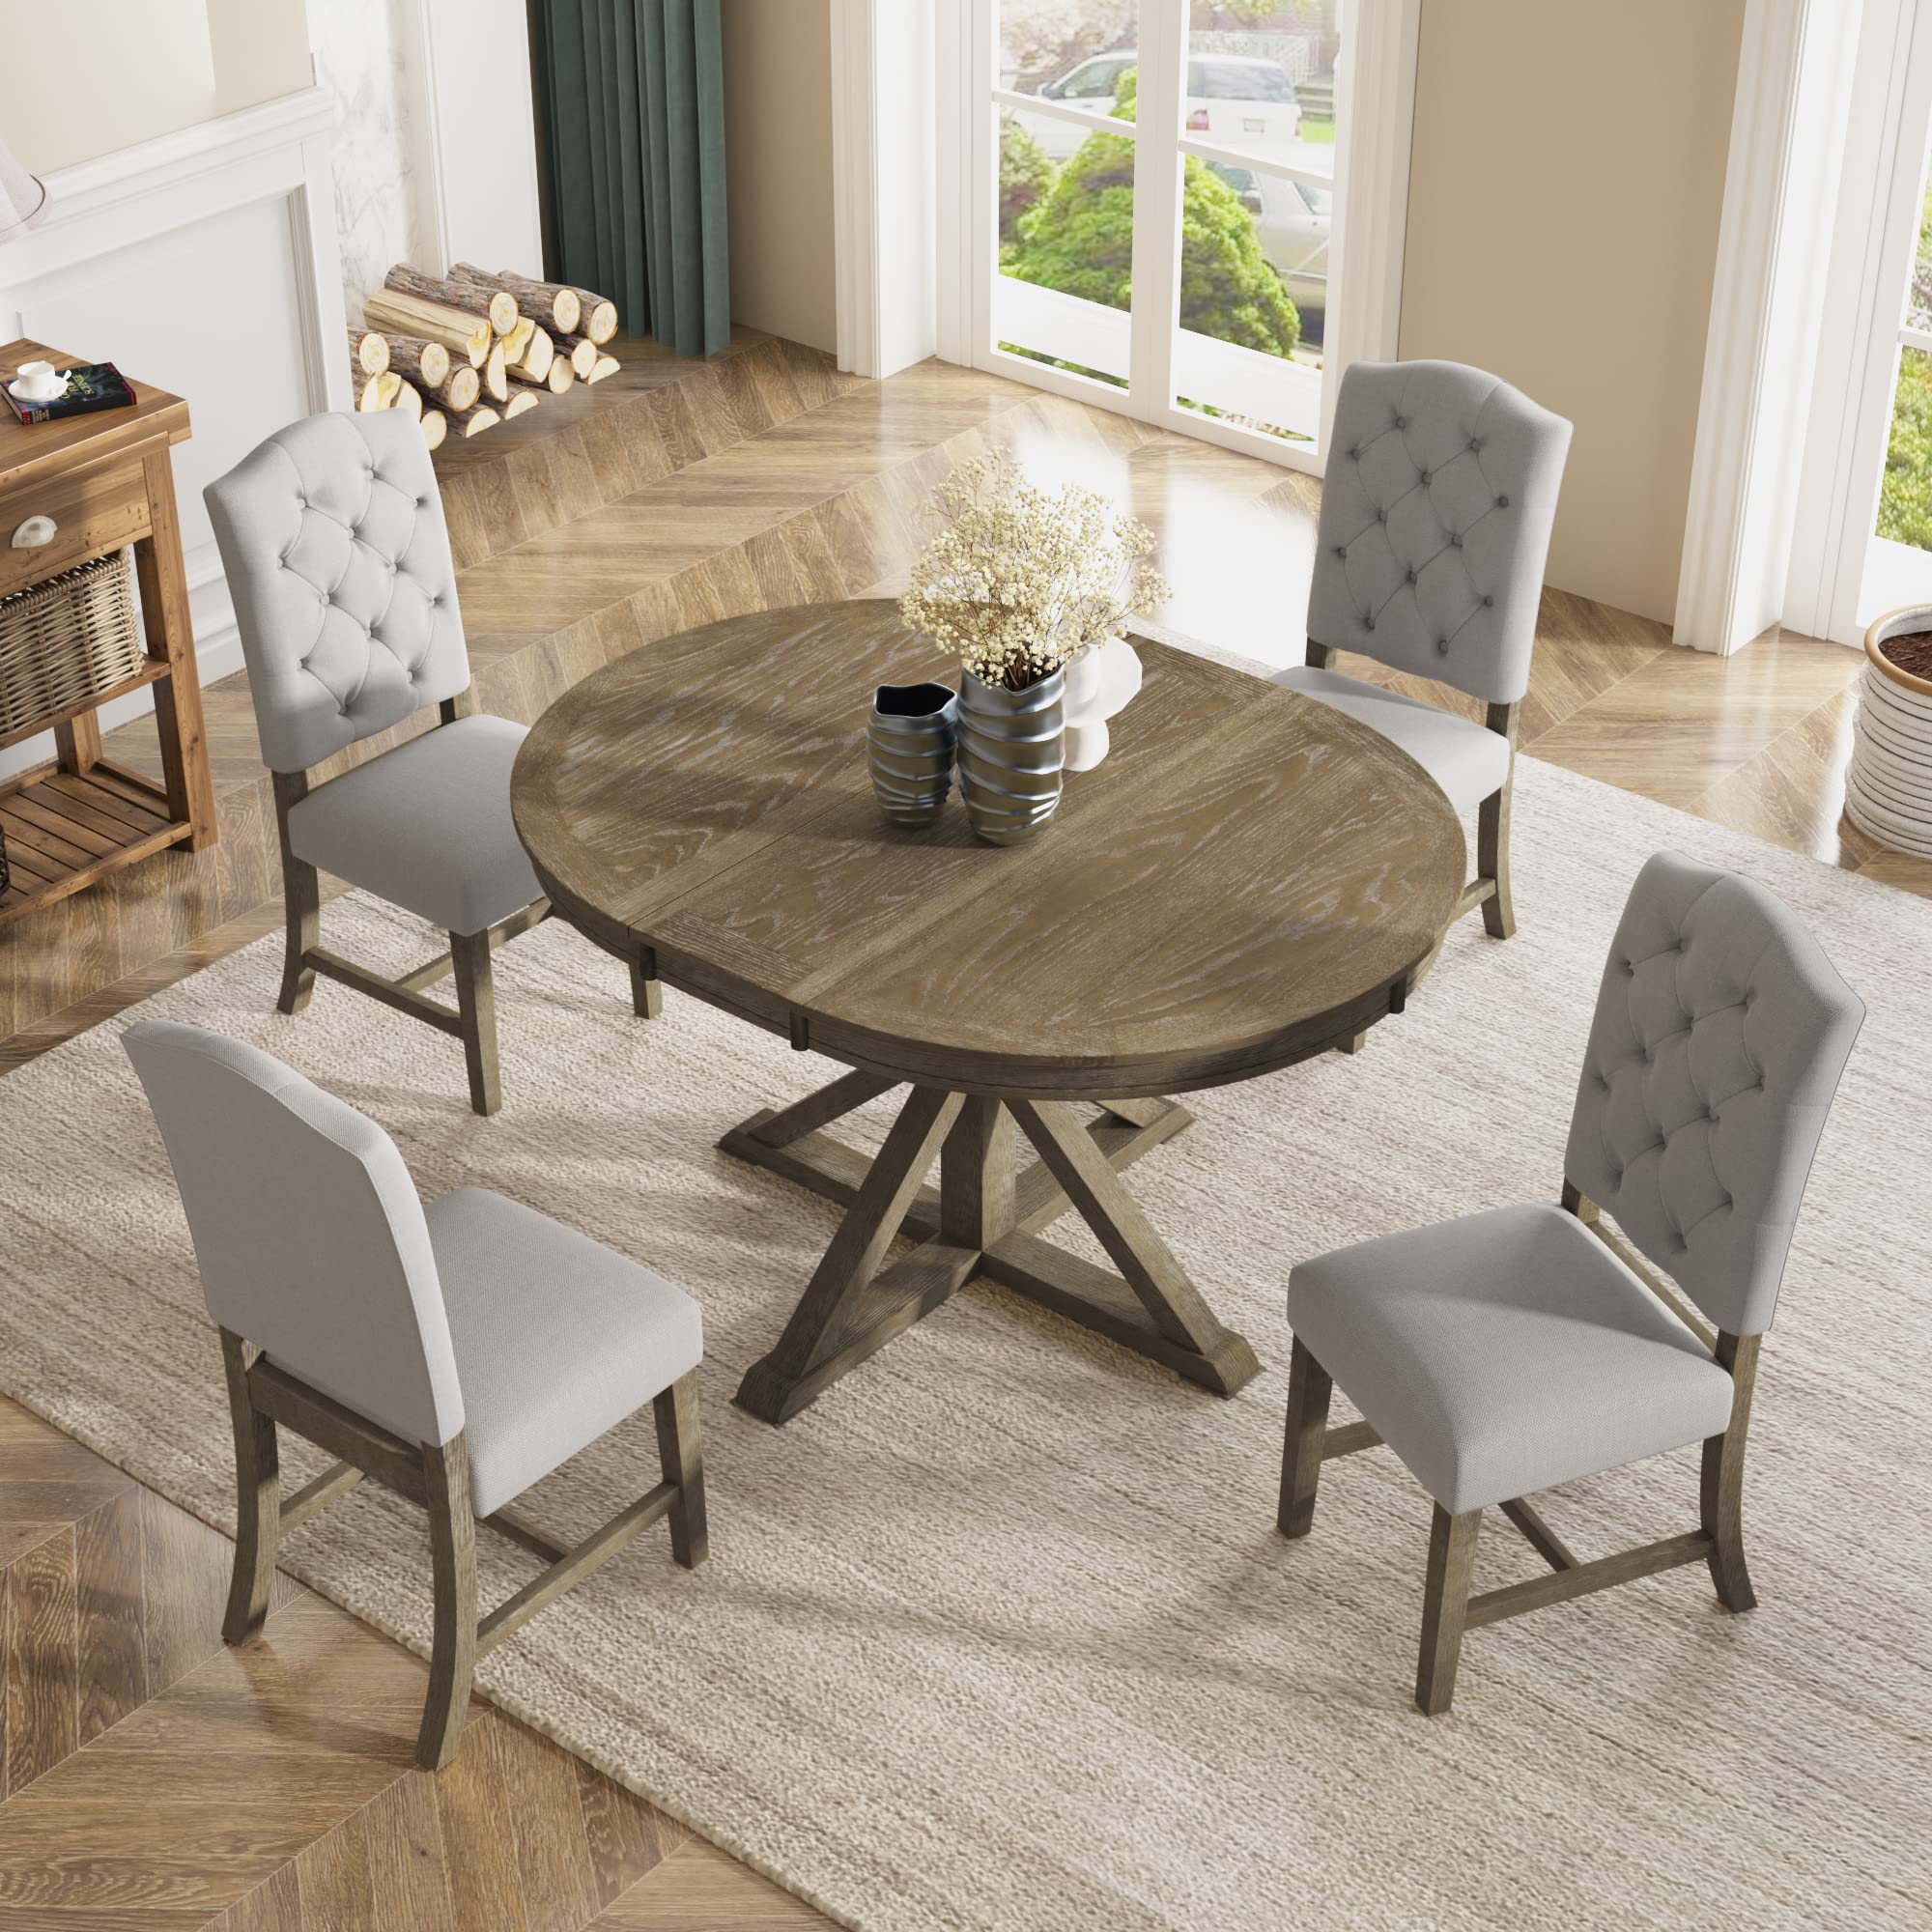 P PURLOVE Retro Style 5-Piece Round Dining Table Set for 4,Round Extendable Table with 4 Upholstered chairs for 4,Dining Room Ta